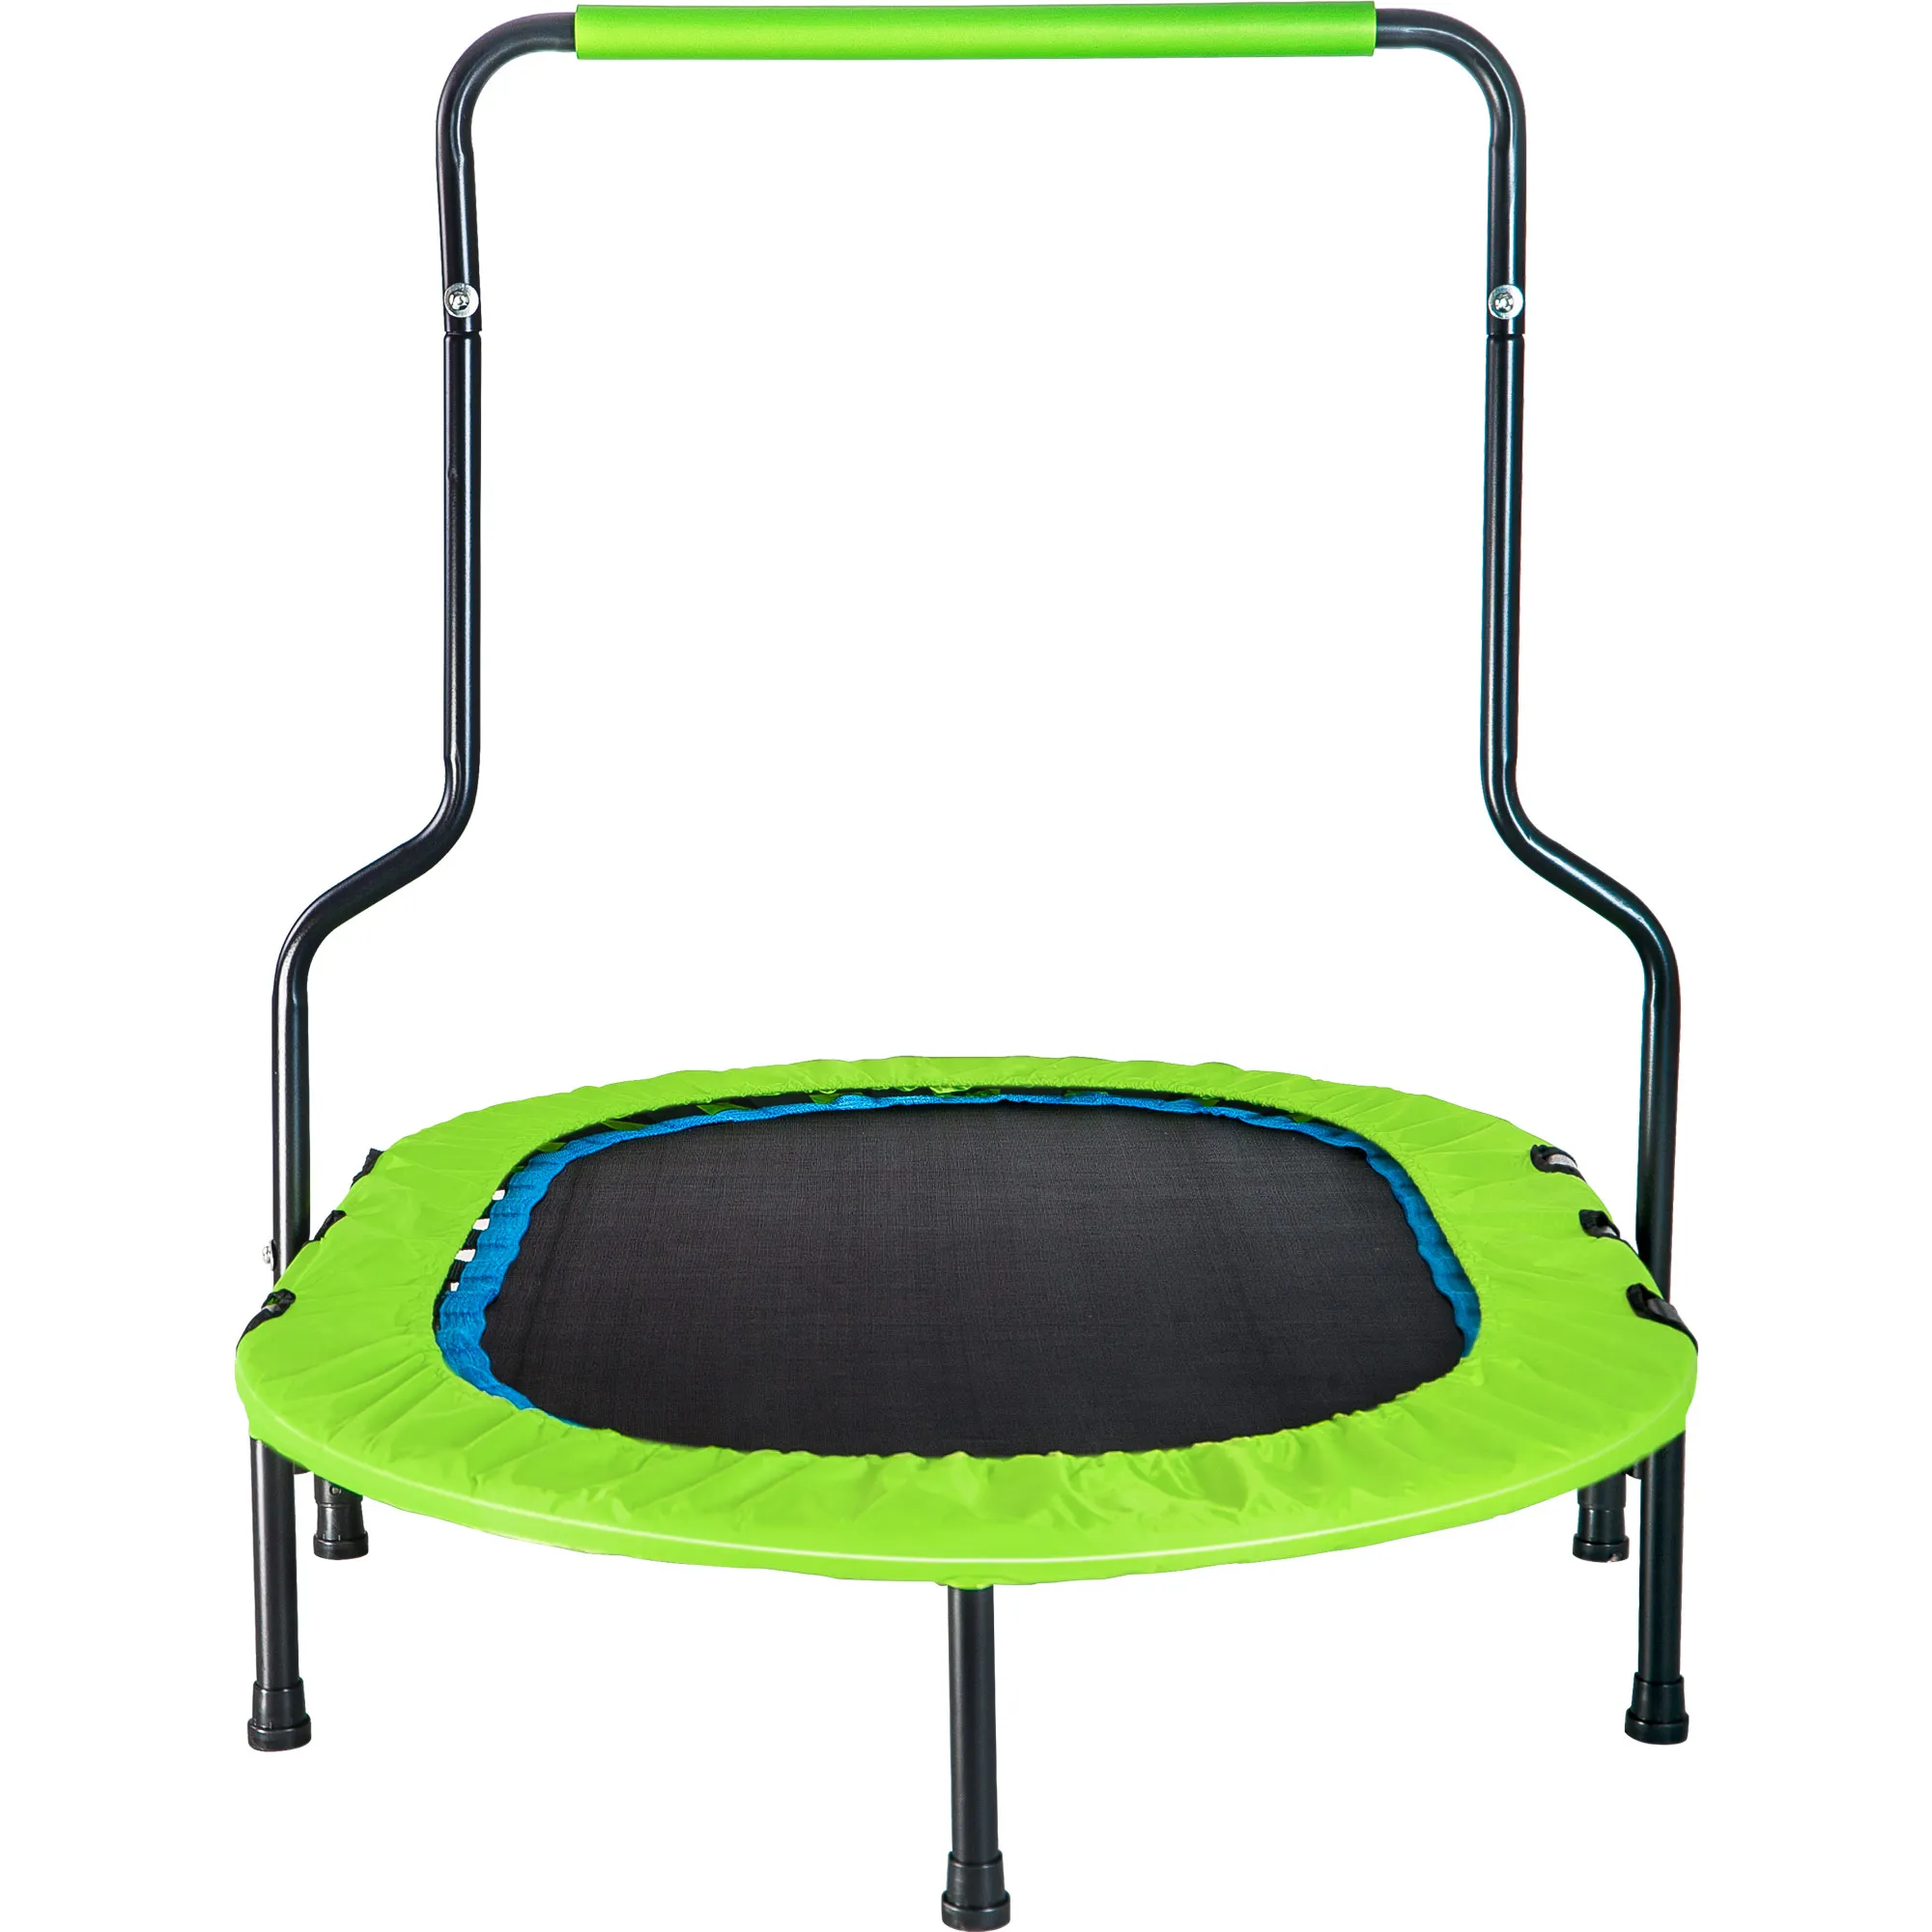 Indoor Outdoor Activity Mini Trampoline With Handrail - Buy Indoor Outdoor Trampoline,Trampoline With Handrail Product on Alibaba.com